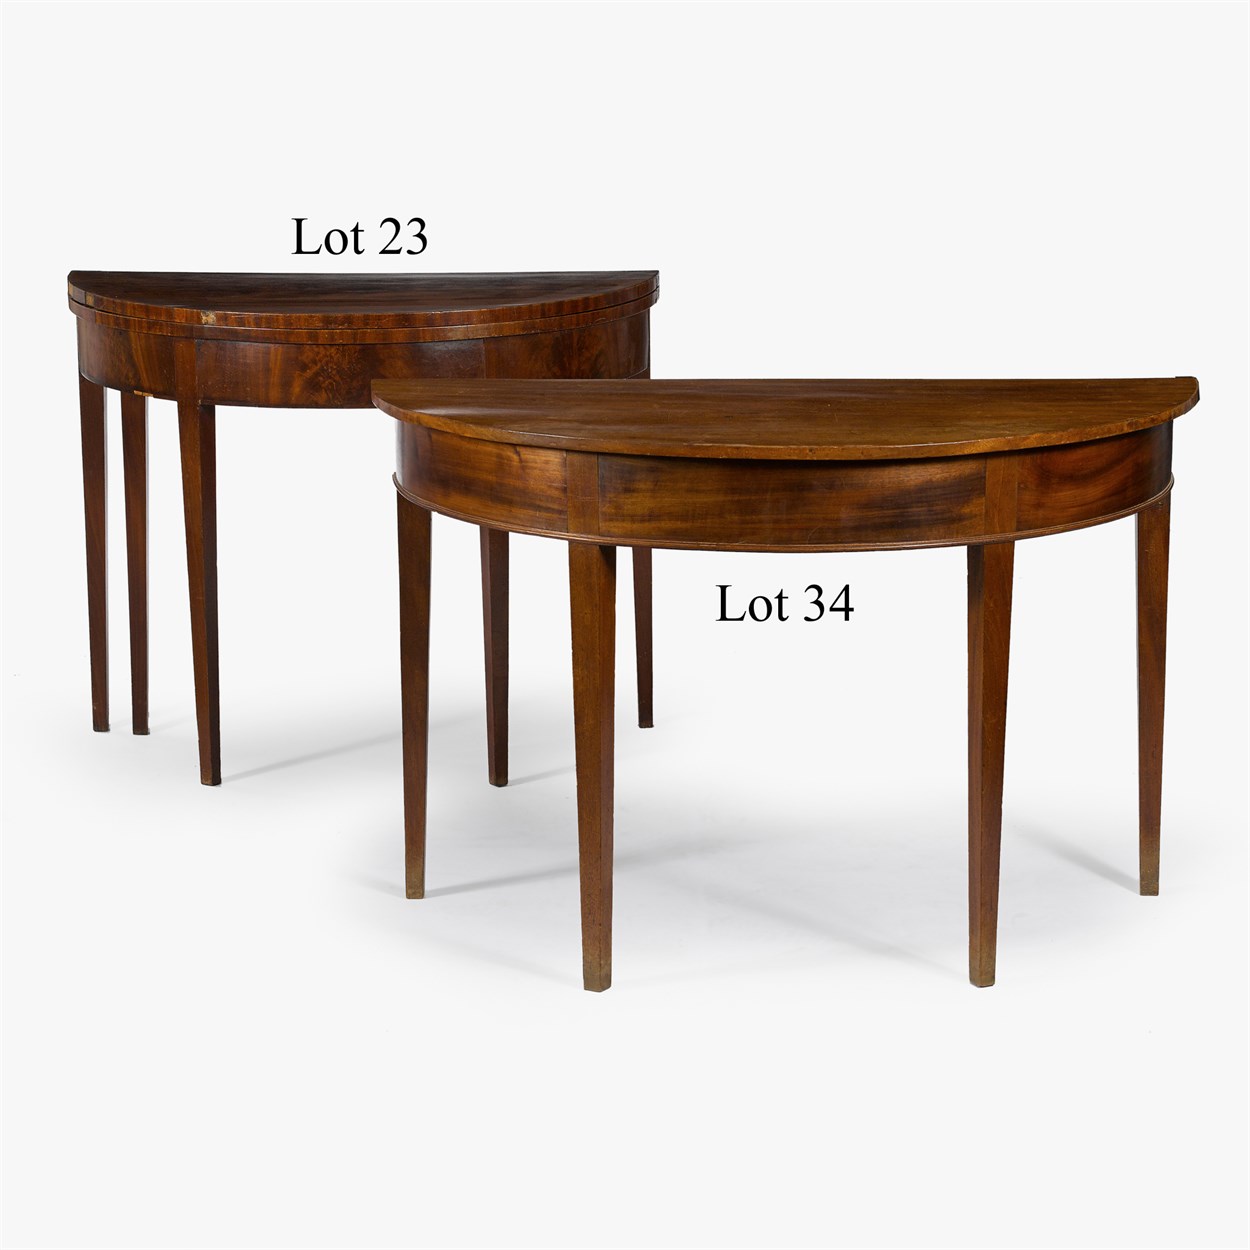 Lot 34 - Federal mahogany demilune dining table end